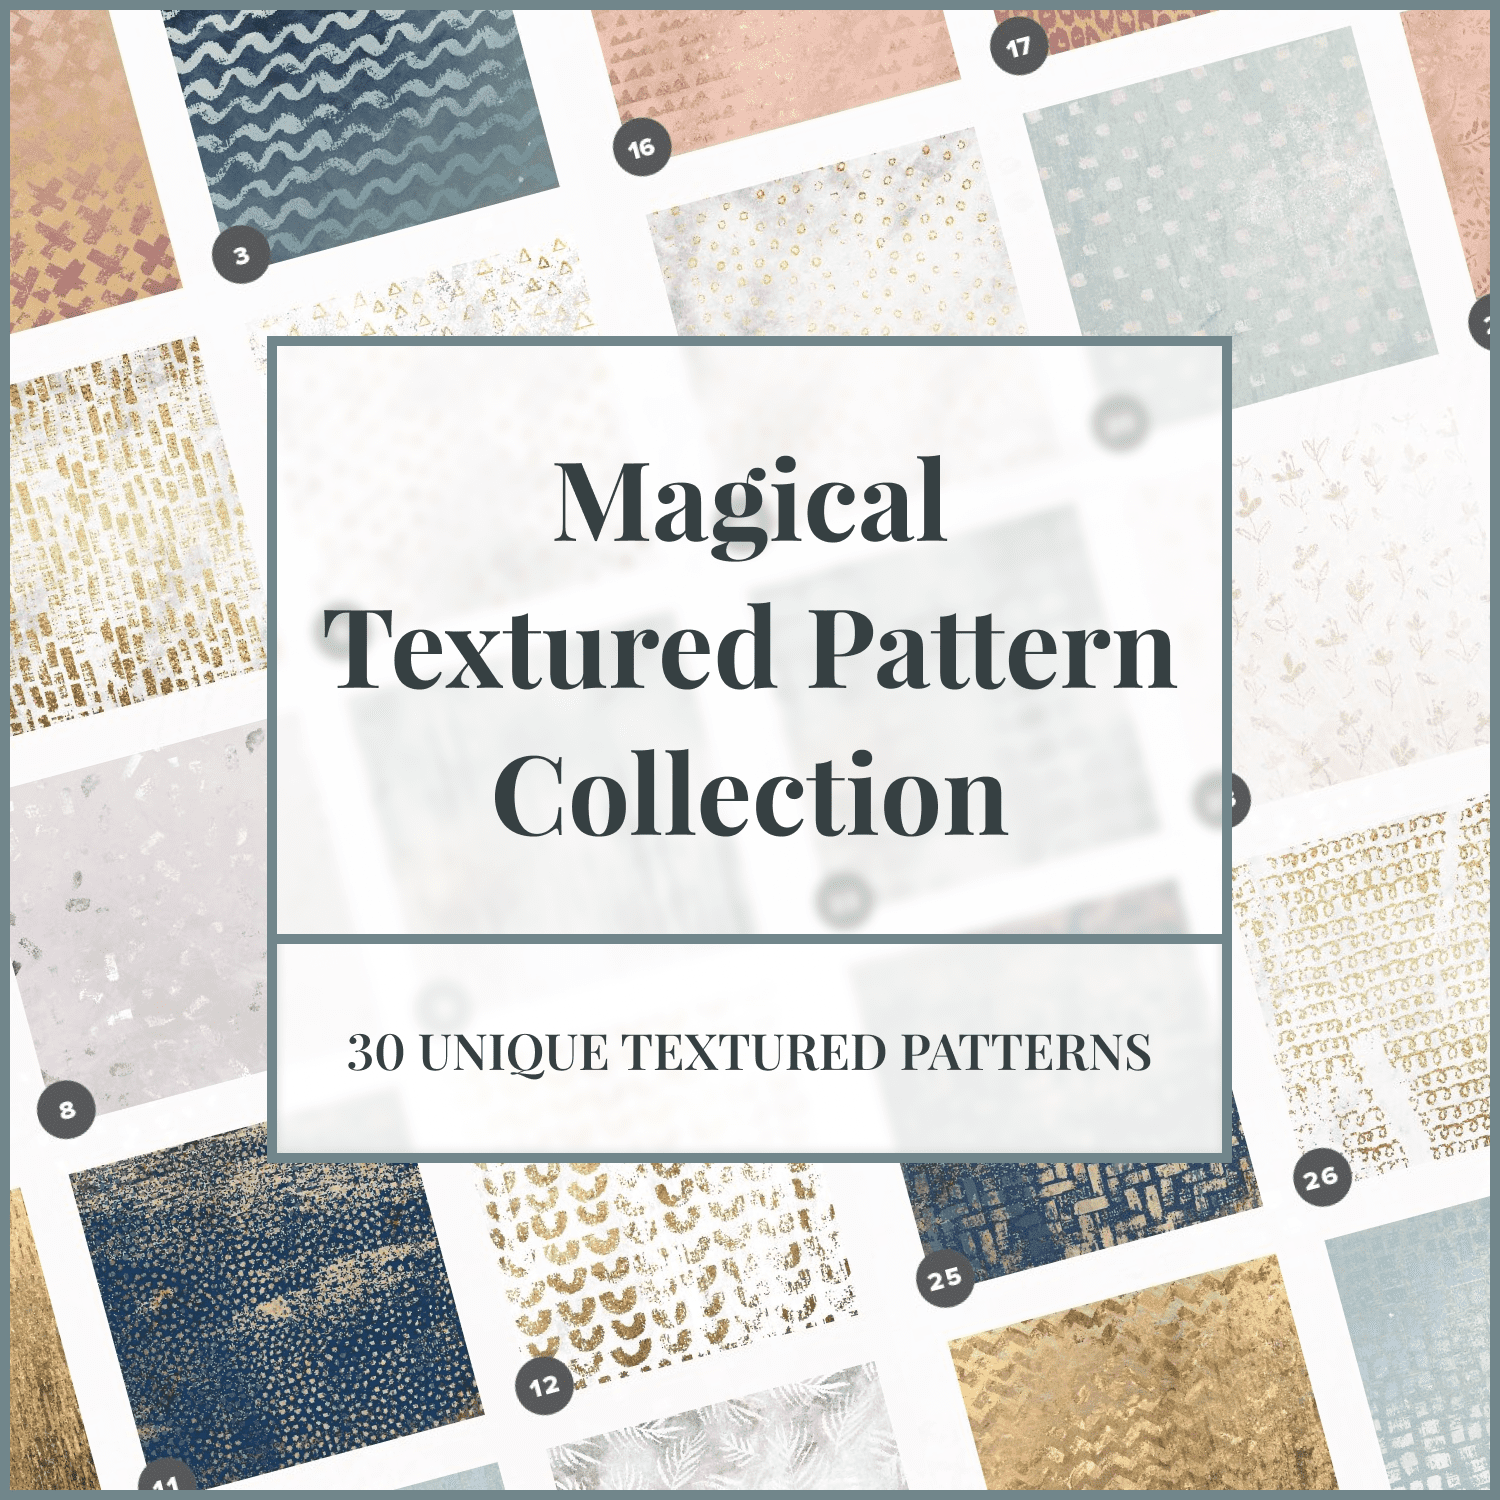 Magical Textured Pattern Collection.